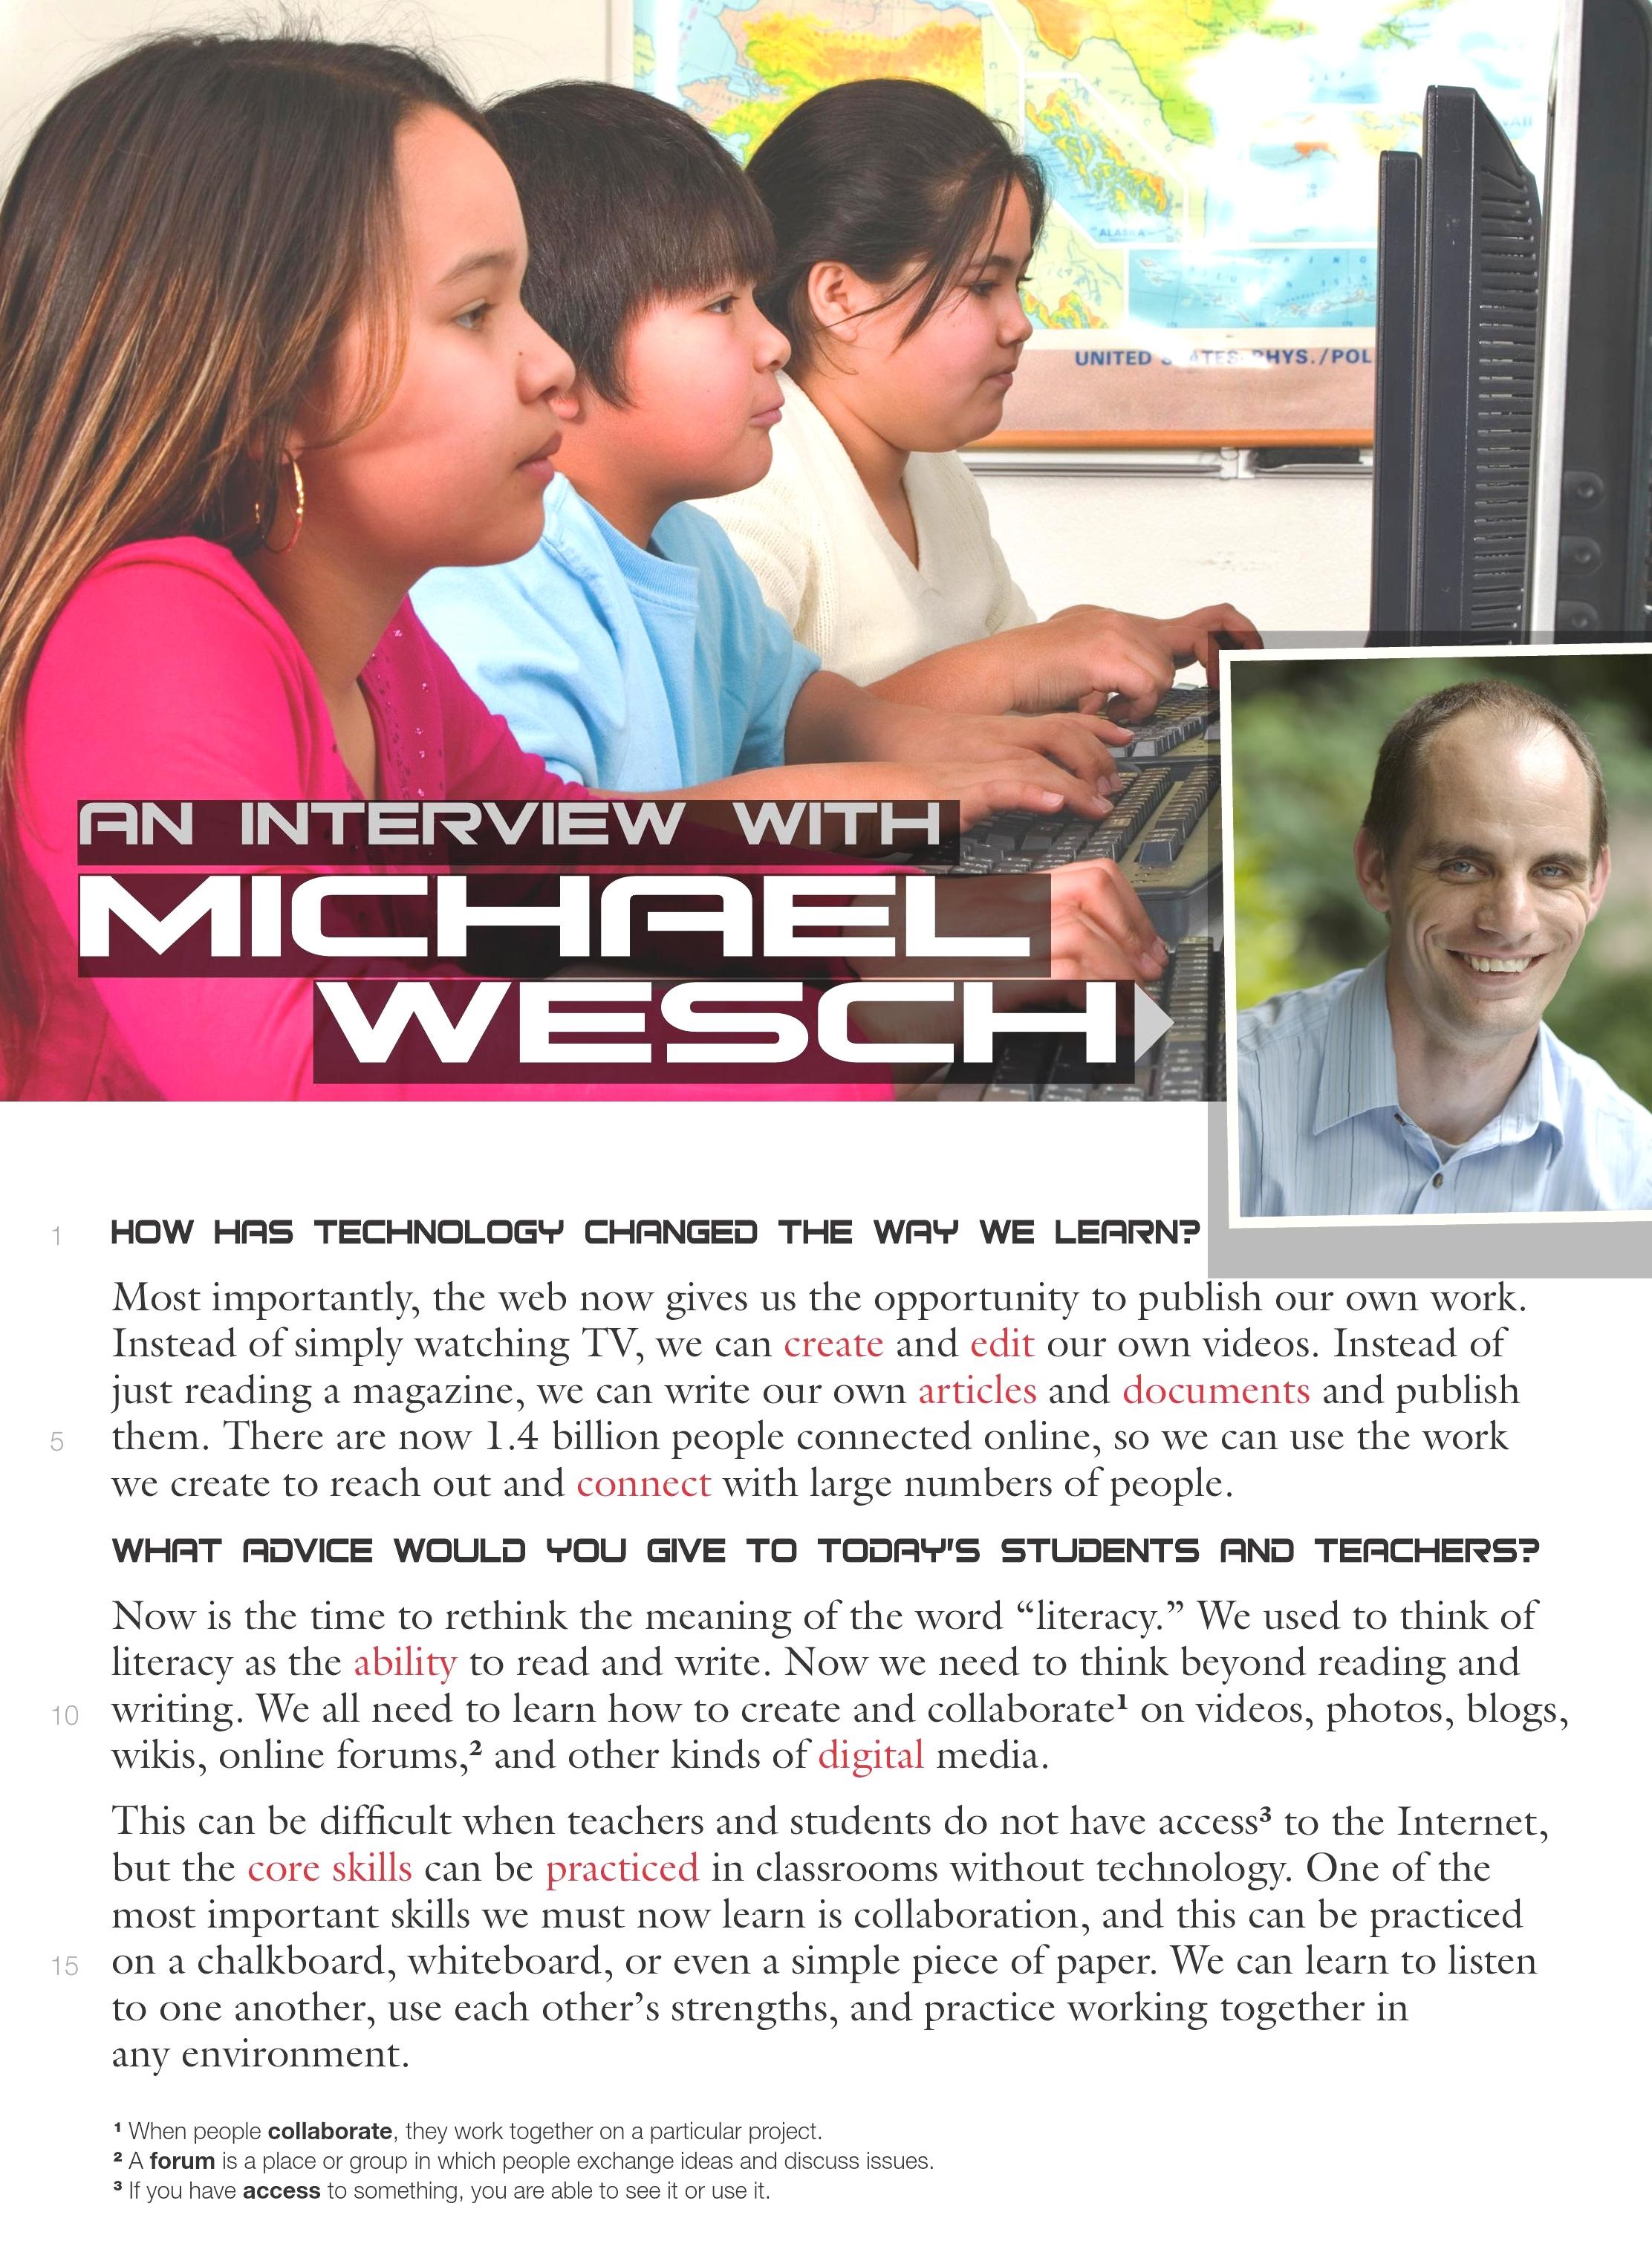 An interview with Michael Wesch - SAOHOM English Centre